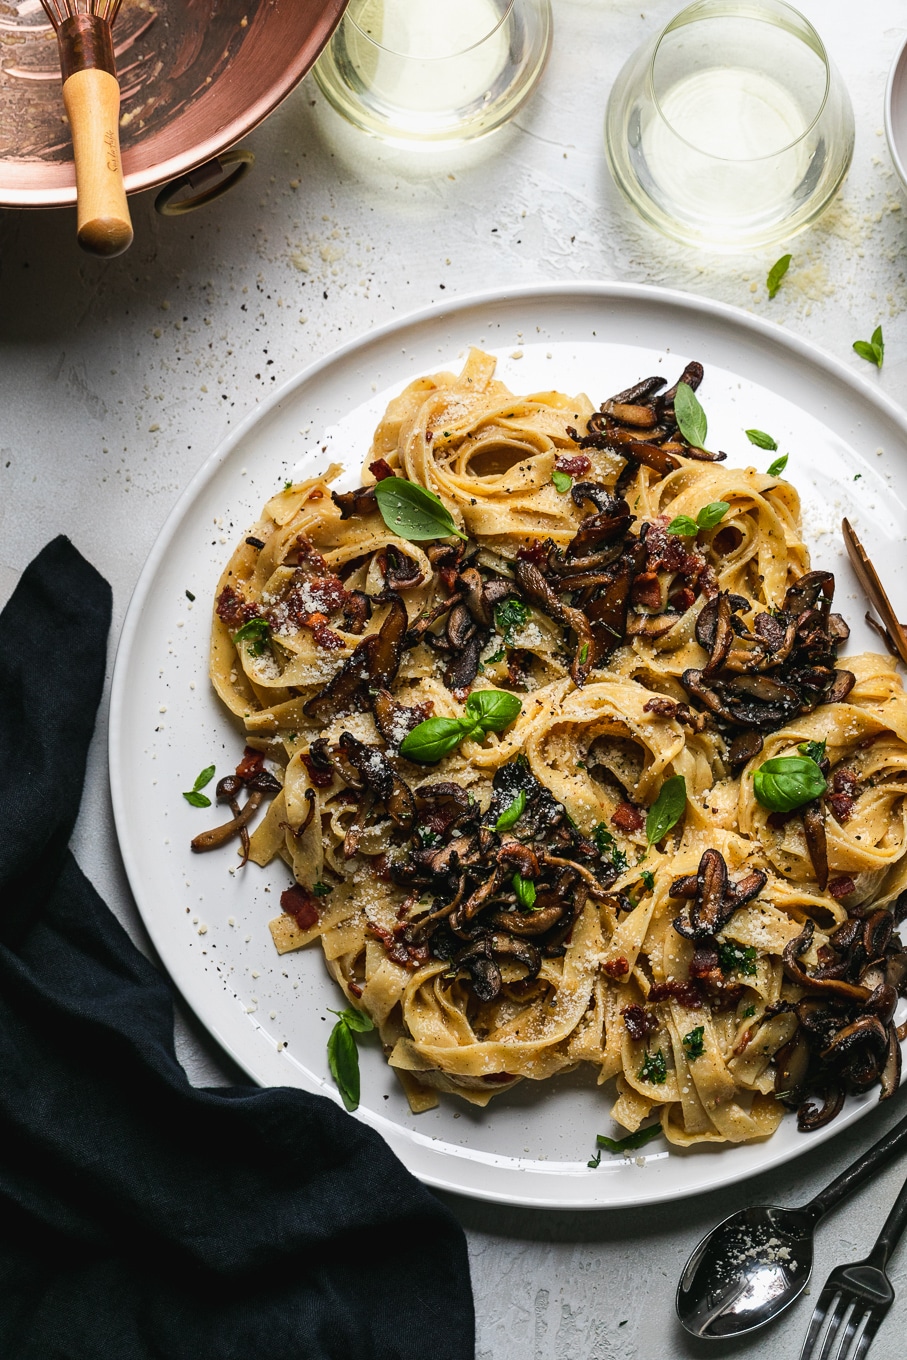 Overhead shot of pasta with mushrooms and herbs with glasses of white wine above the plate